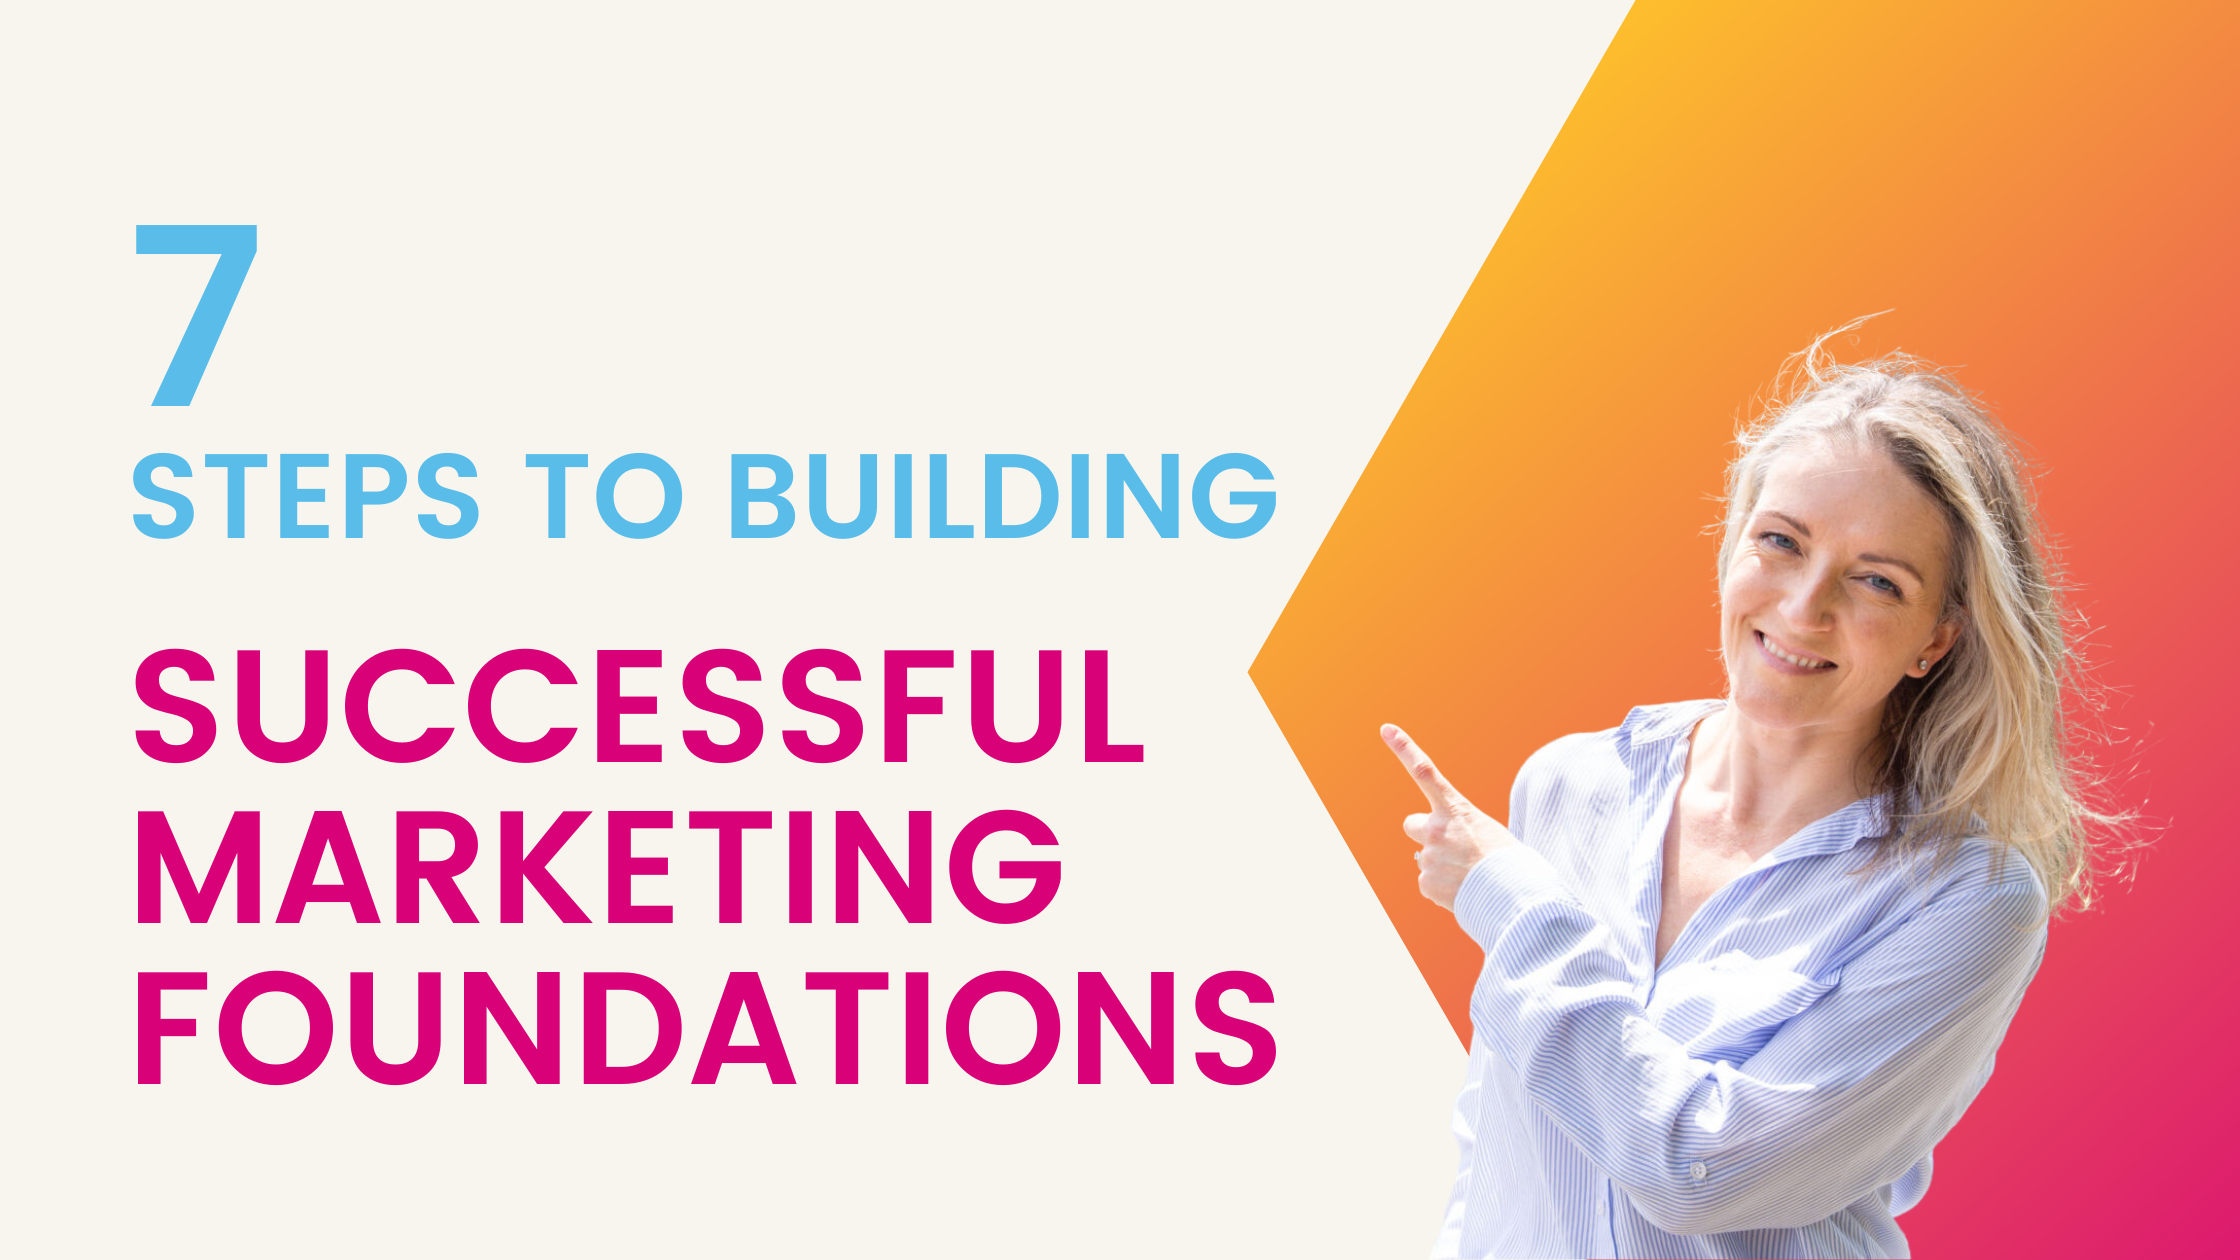 7 Steps to Building Successful Marketing Foundations - Blog from Interalia Marketing